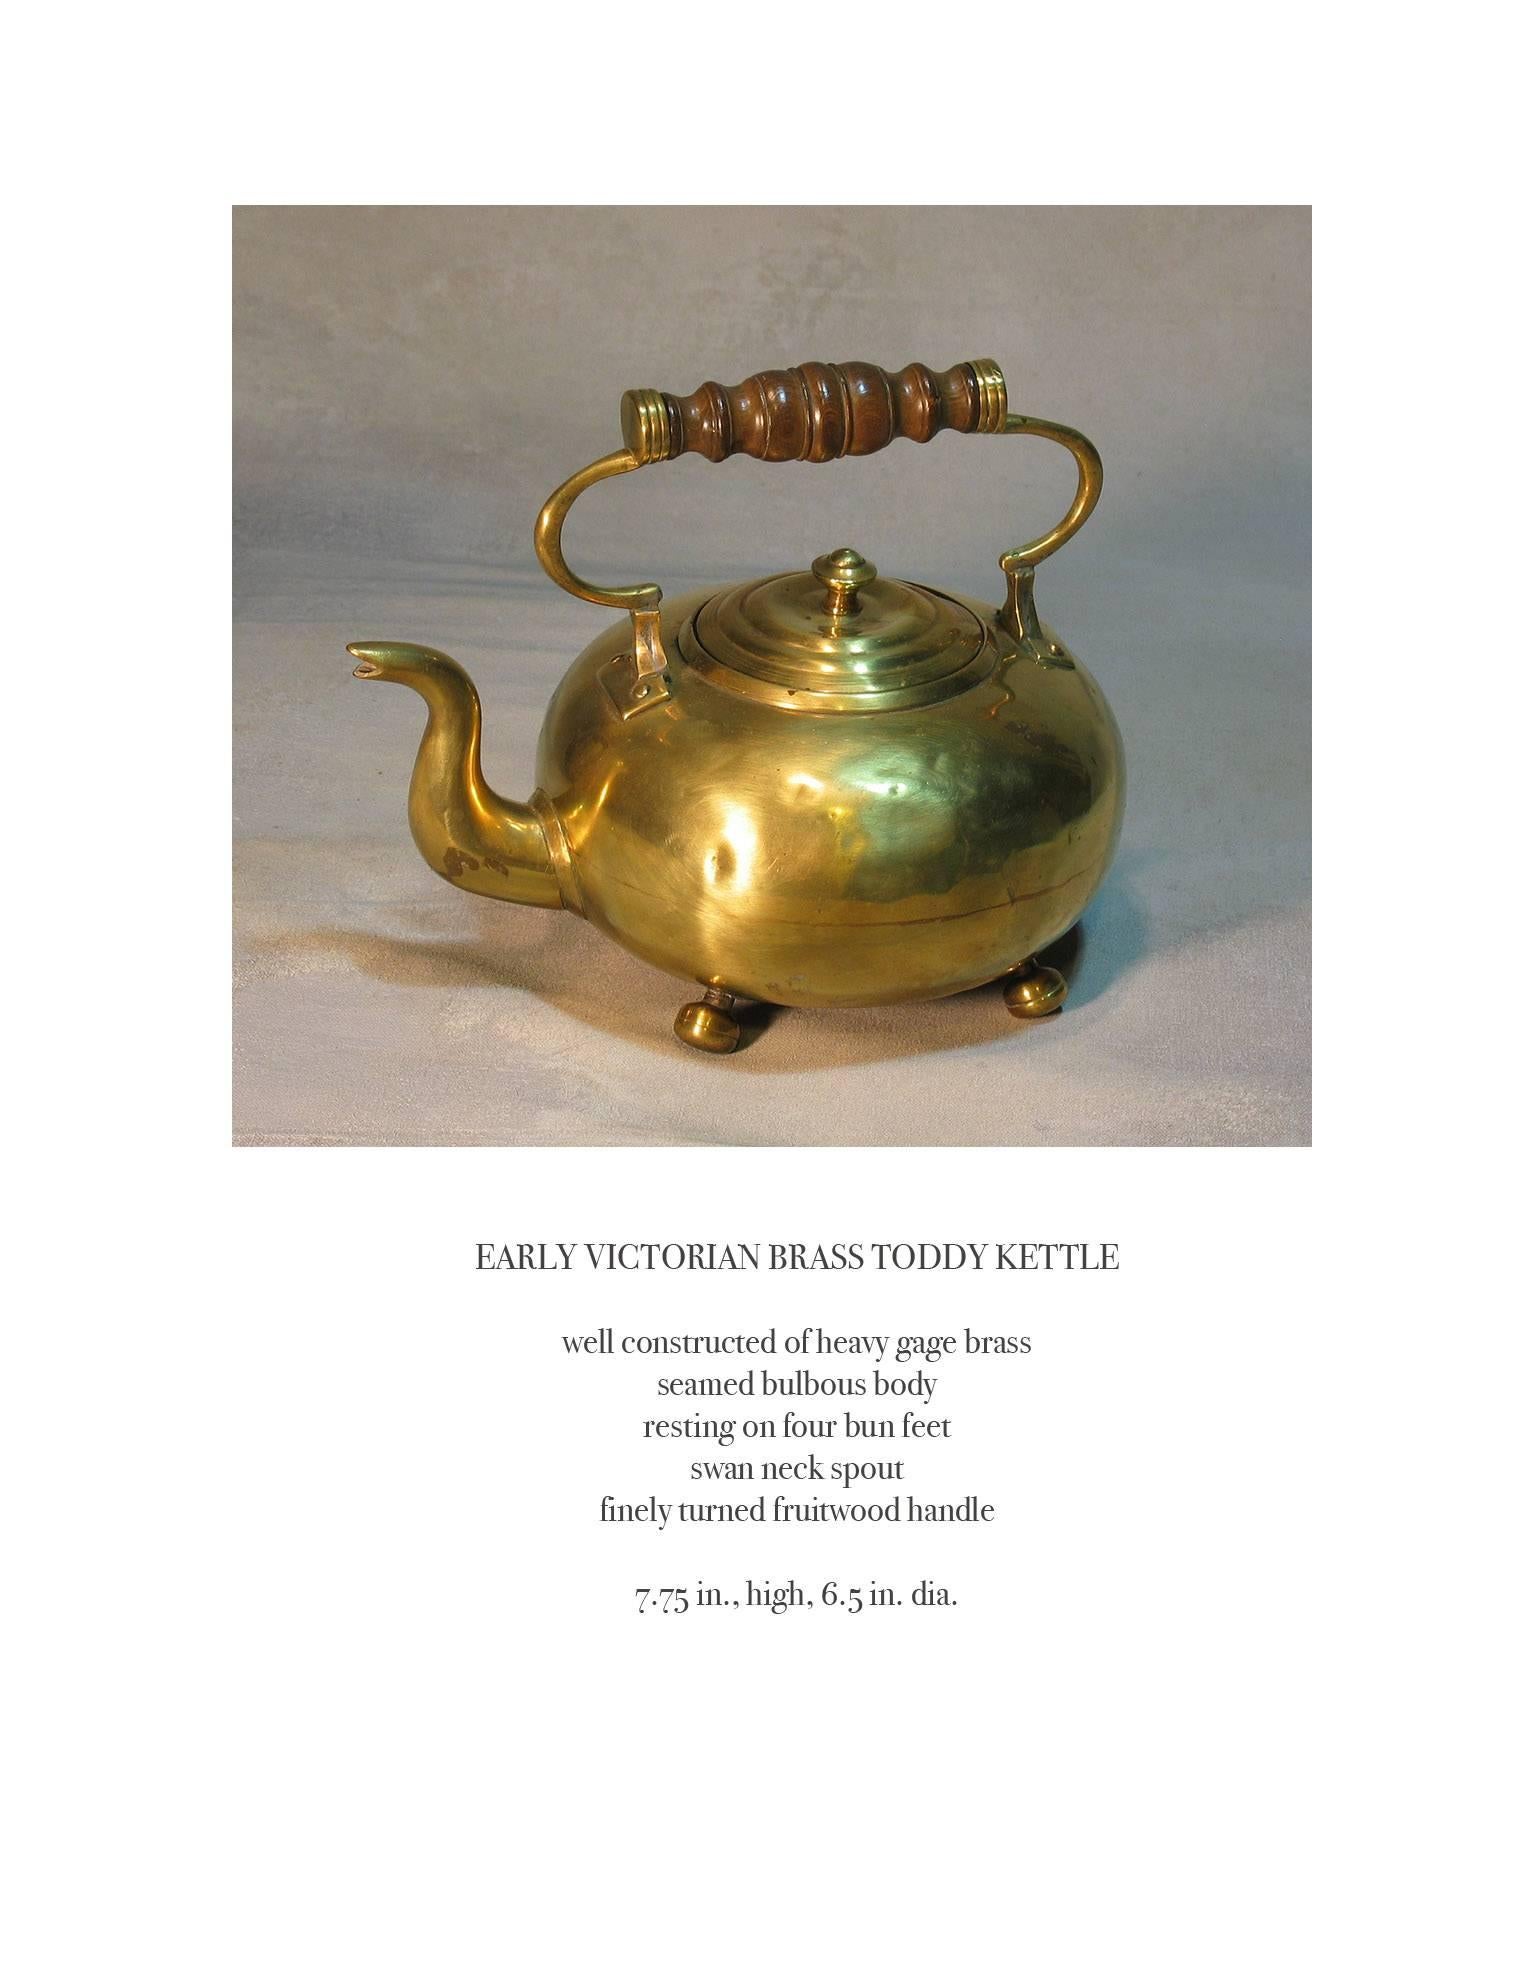 Early Victorian brass toddy kettle, fruitwood handle, circa 1840. Well-constructed of heavy gauge brass, seamed bulbous body resting on four bun feet, swan neck spout, finely turned fruitwood handle. The toddy measures 7 3/4